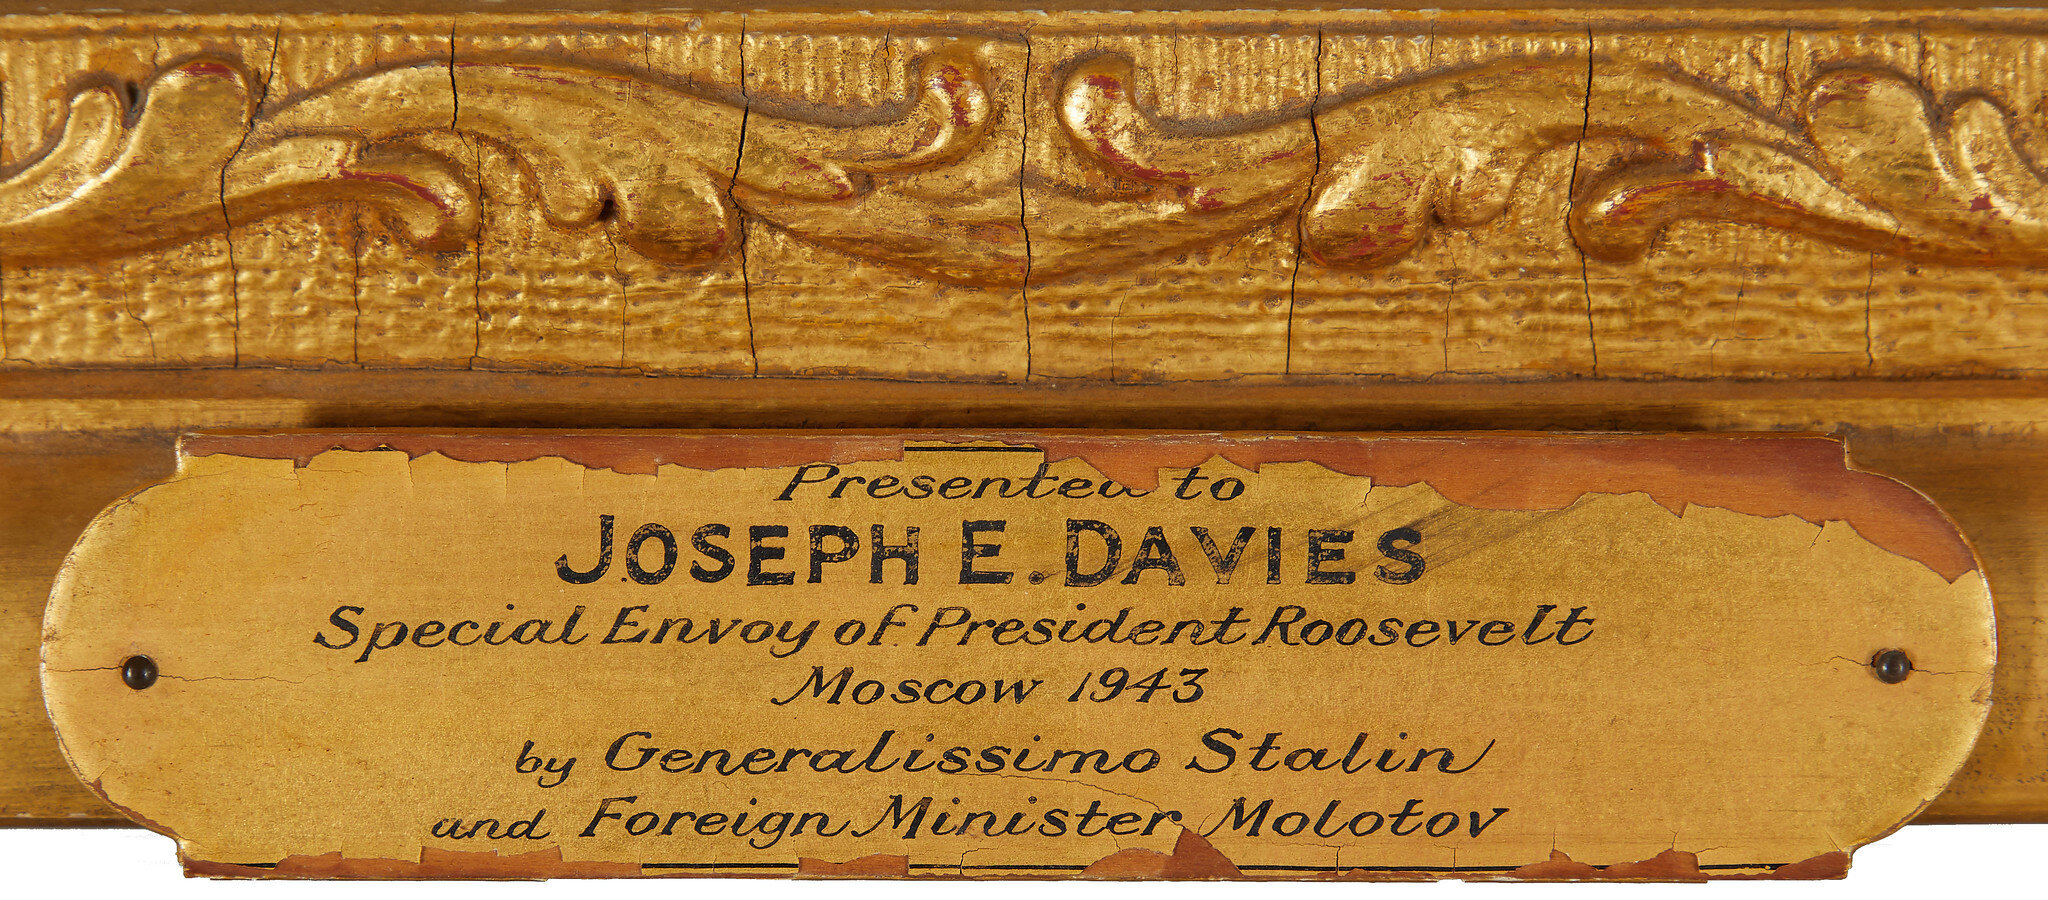 Detail of the inscription on the engraved plate.